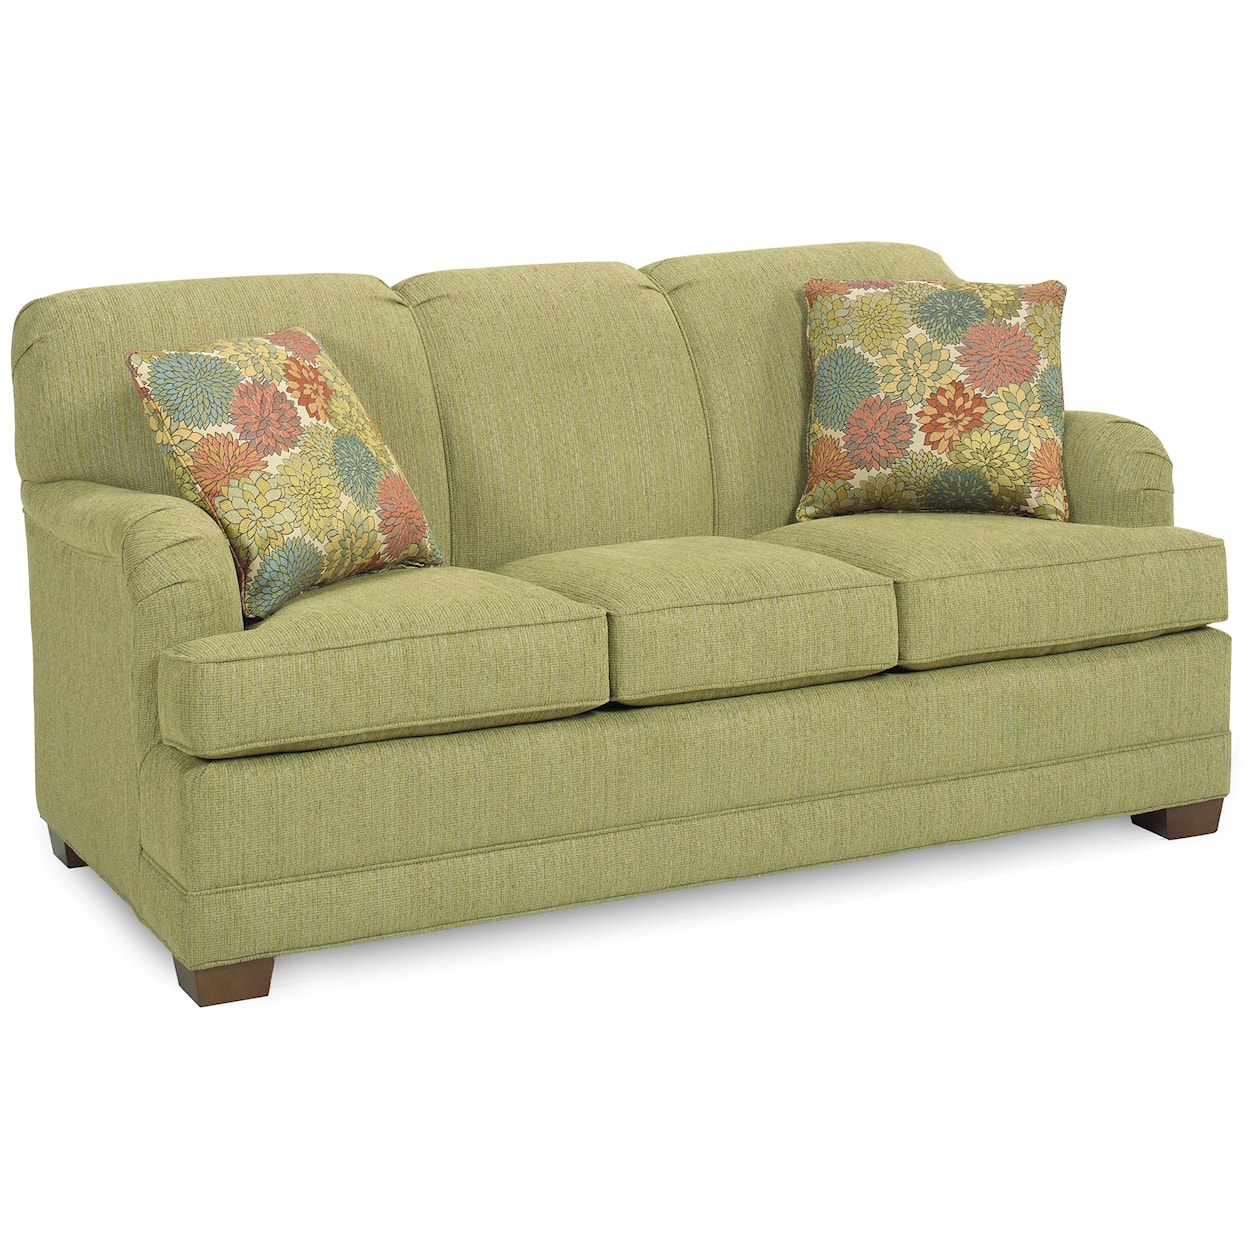 Temple Furniture Tailor Made Traditional Stationary Sofa